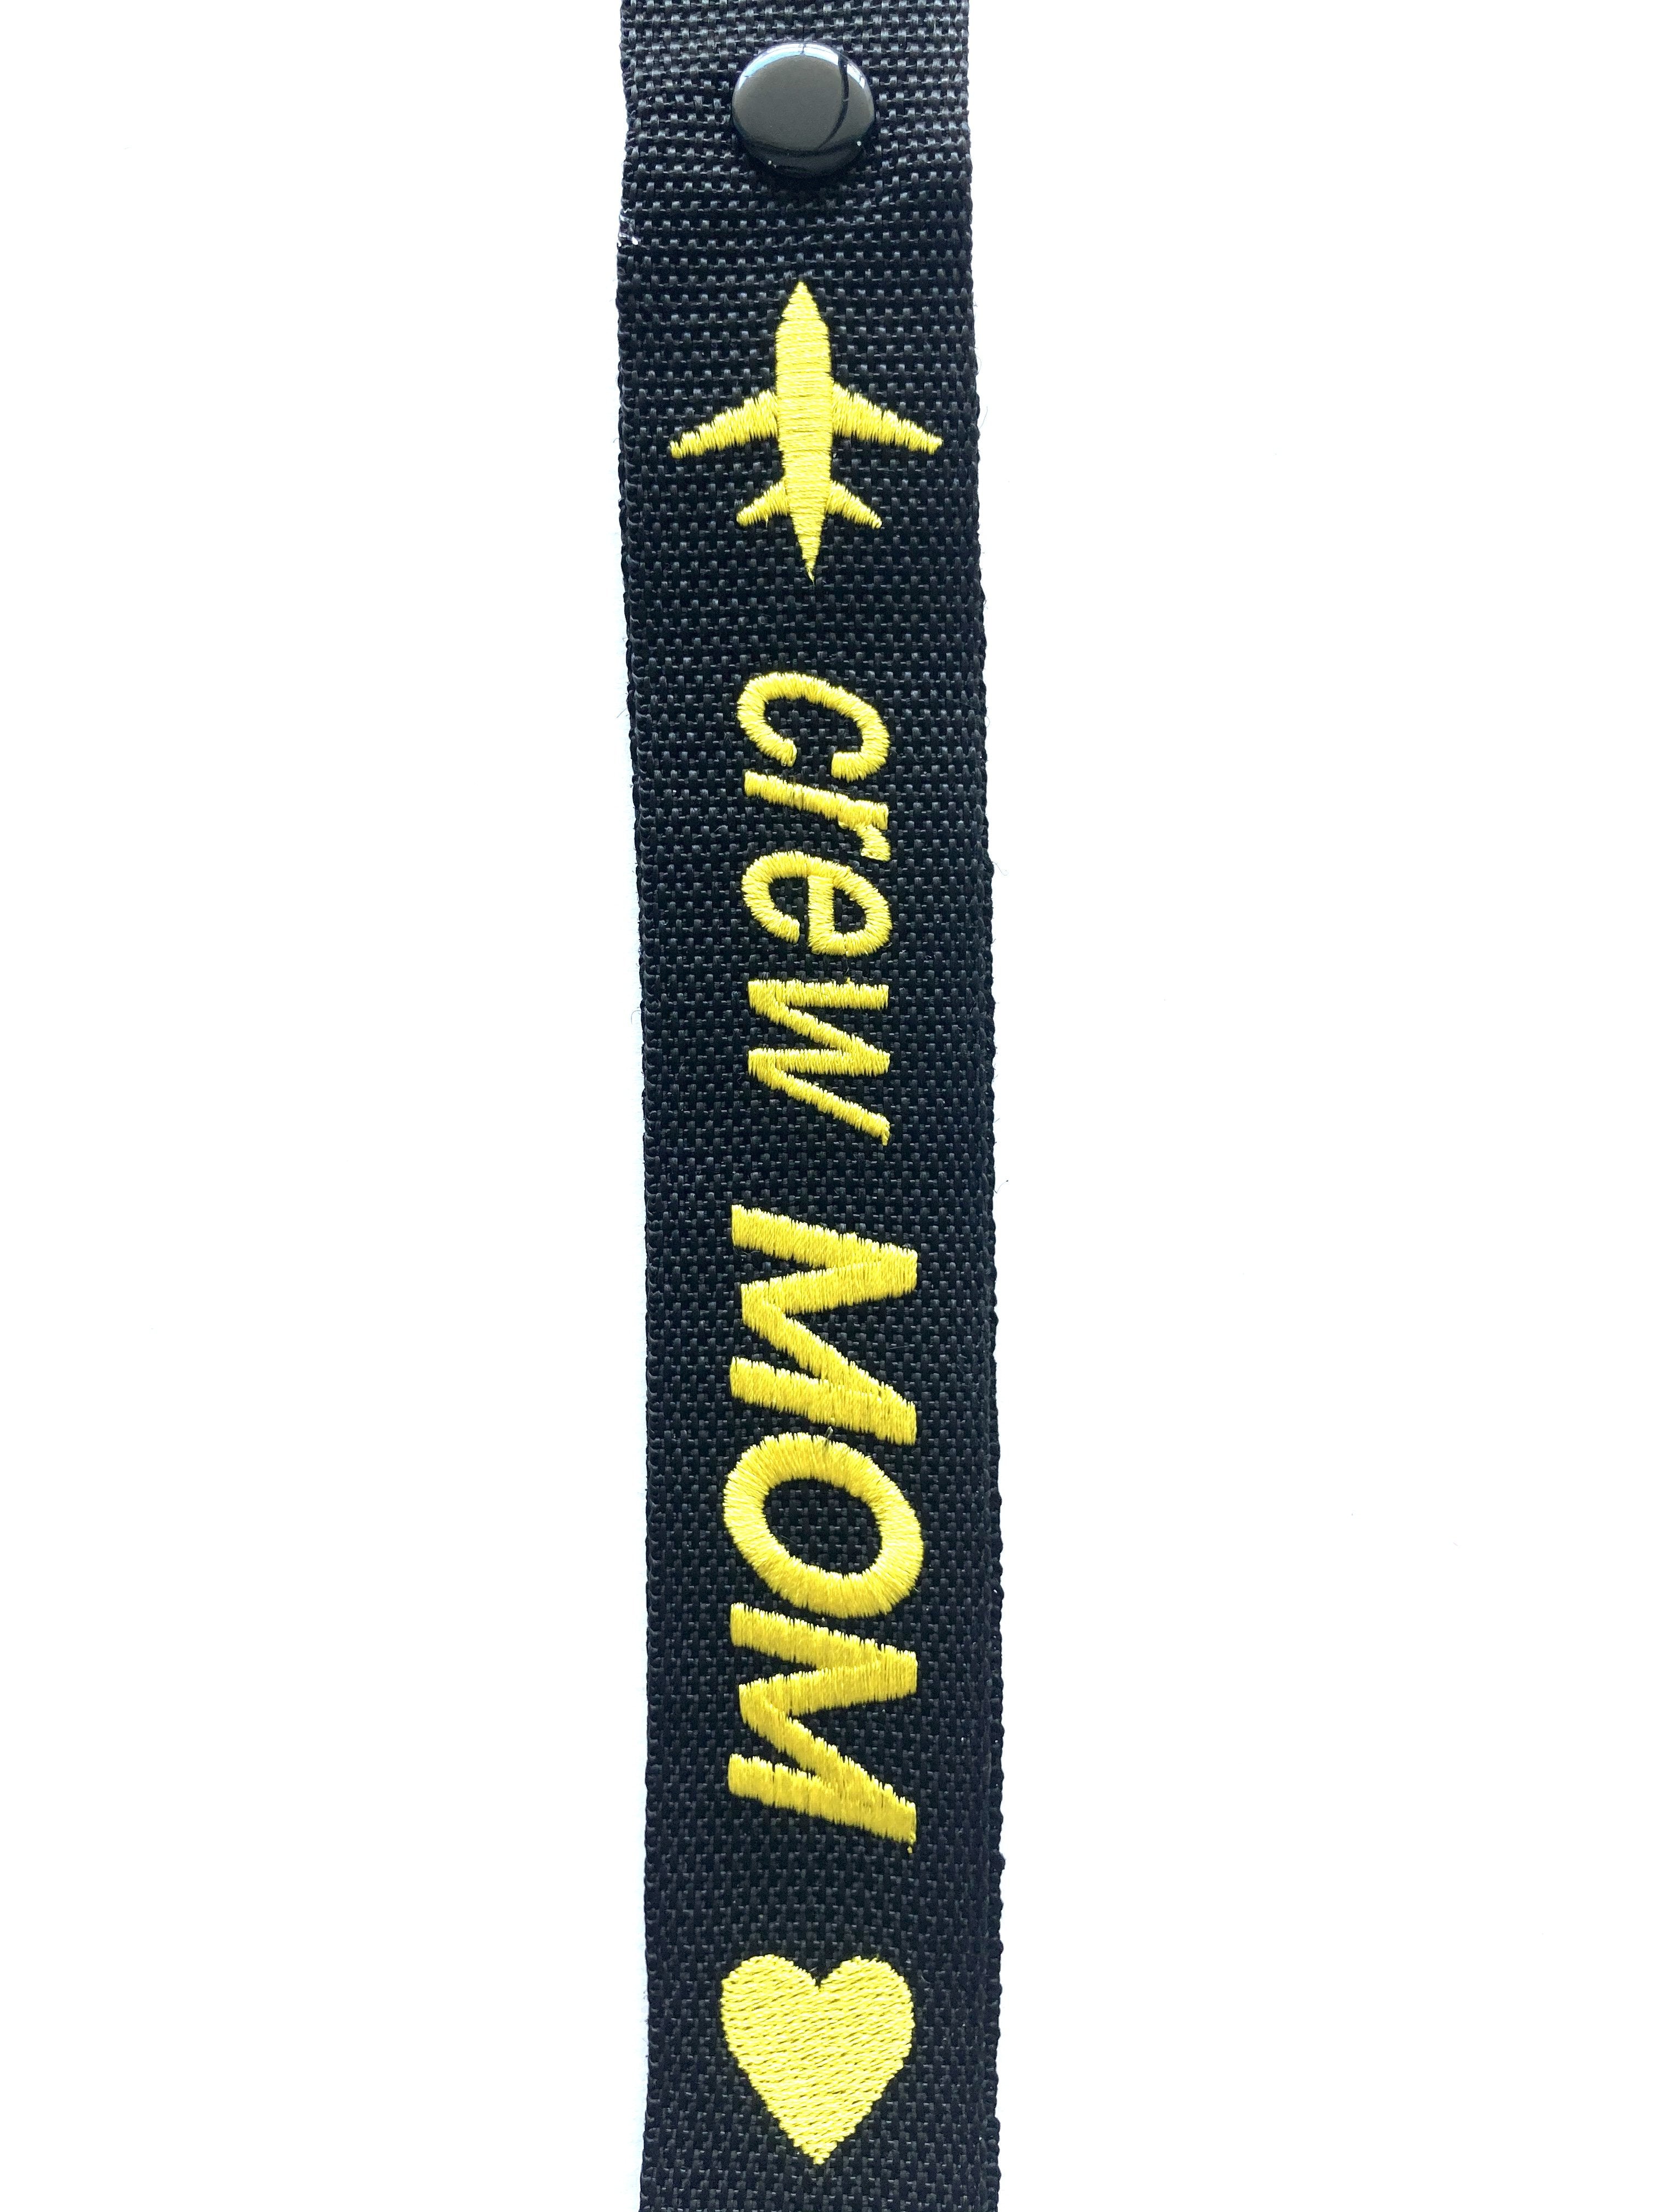 CREW FAMILY LUGGAGE TAGS Crew Mom Luggage Tag Yellow